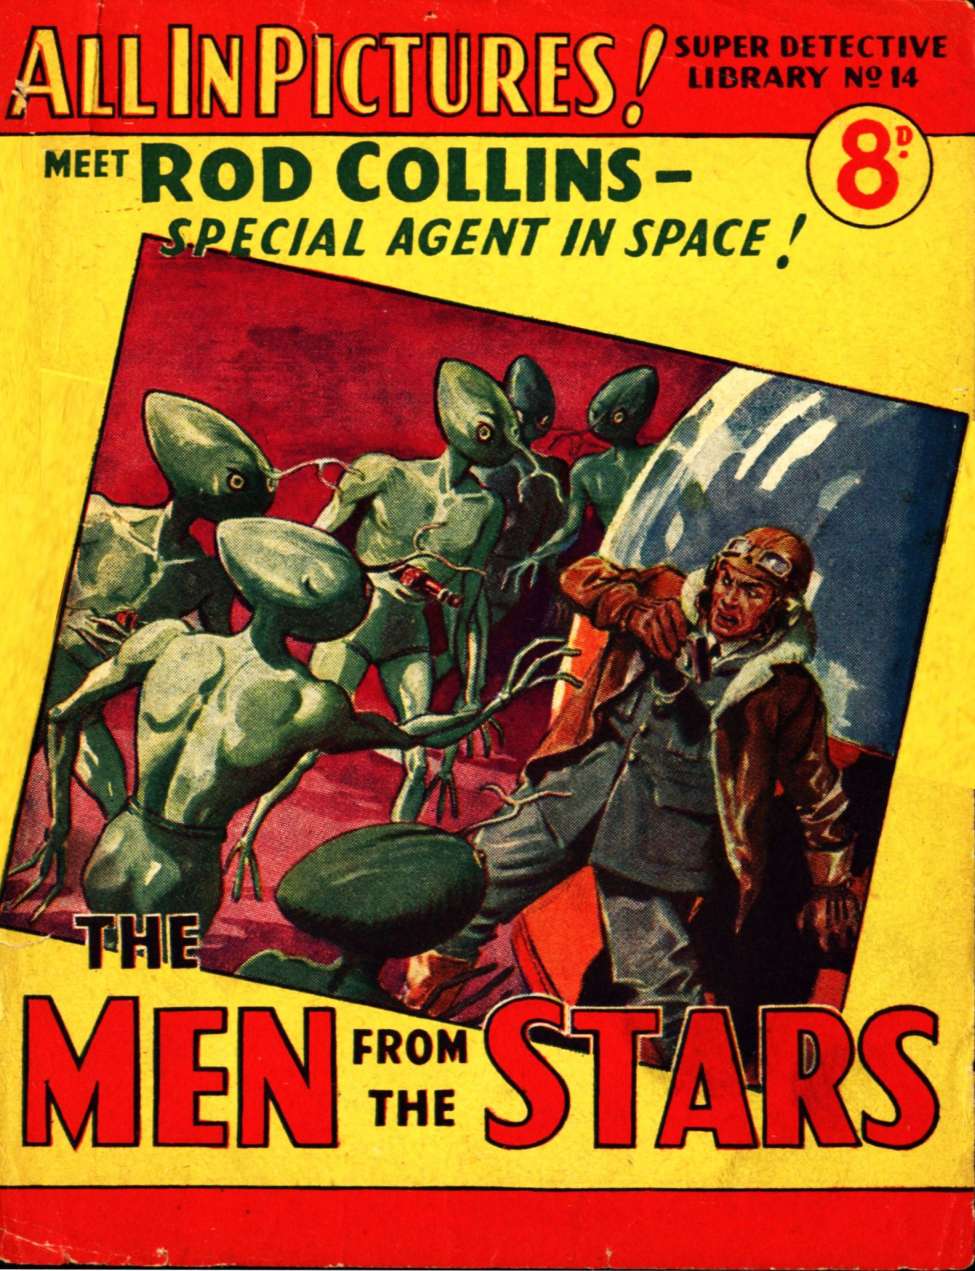 Comic Book Cover For Super Detective Library 14 - Men From The Stars